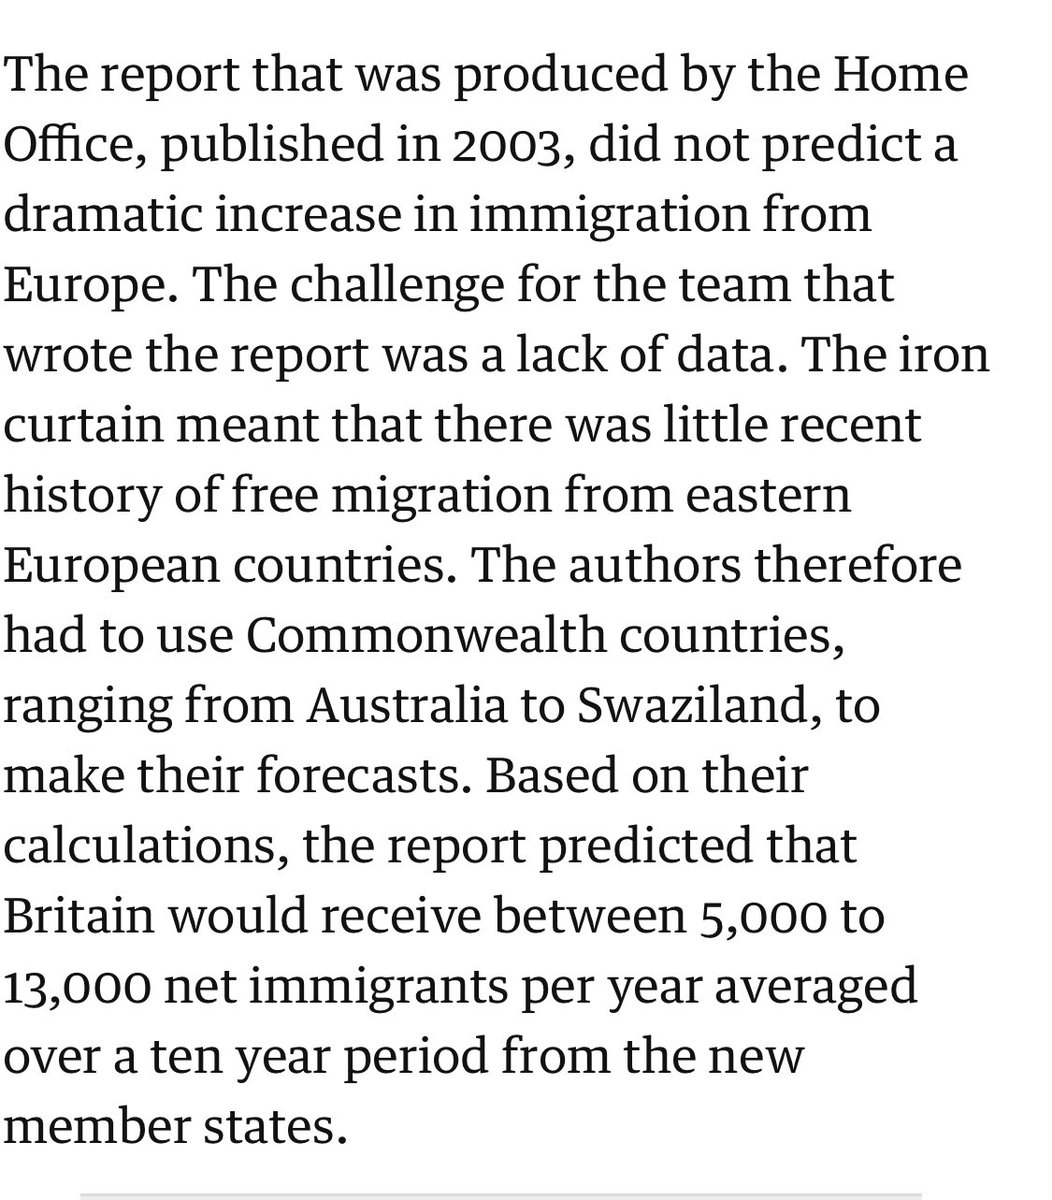 Worth mentioning U.K. estimates have a habit of being wrong — immigration from new EU member states in 2003 were put at a comic 15,000 a year. With Home Office estimates leaving out intangibles like fear or freedom we could be undercounting again.